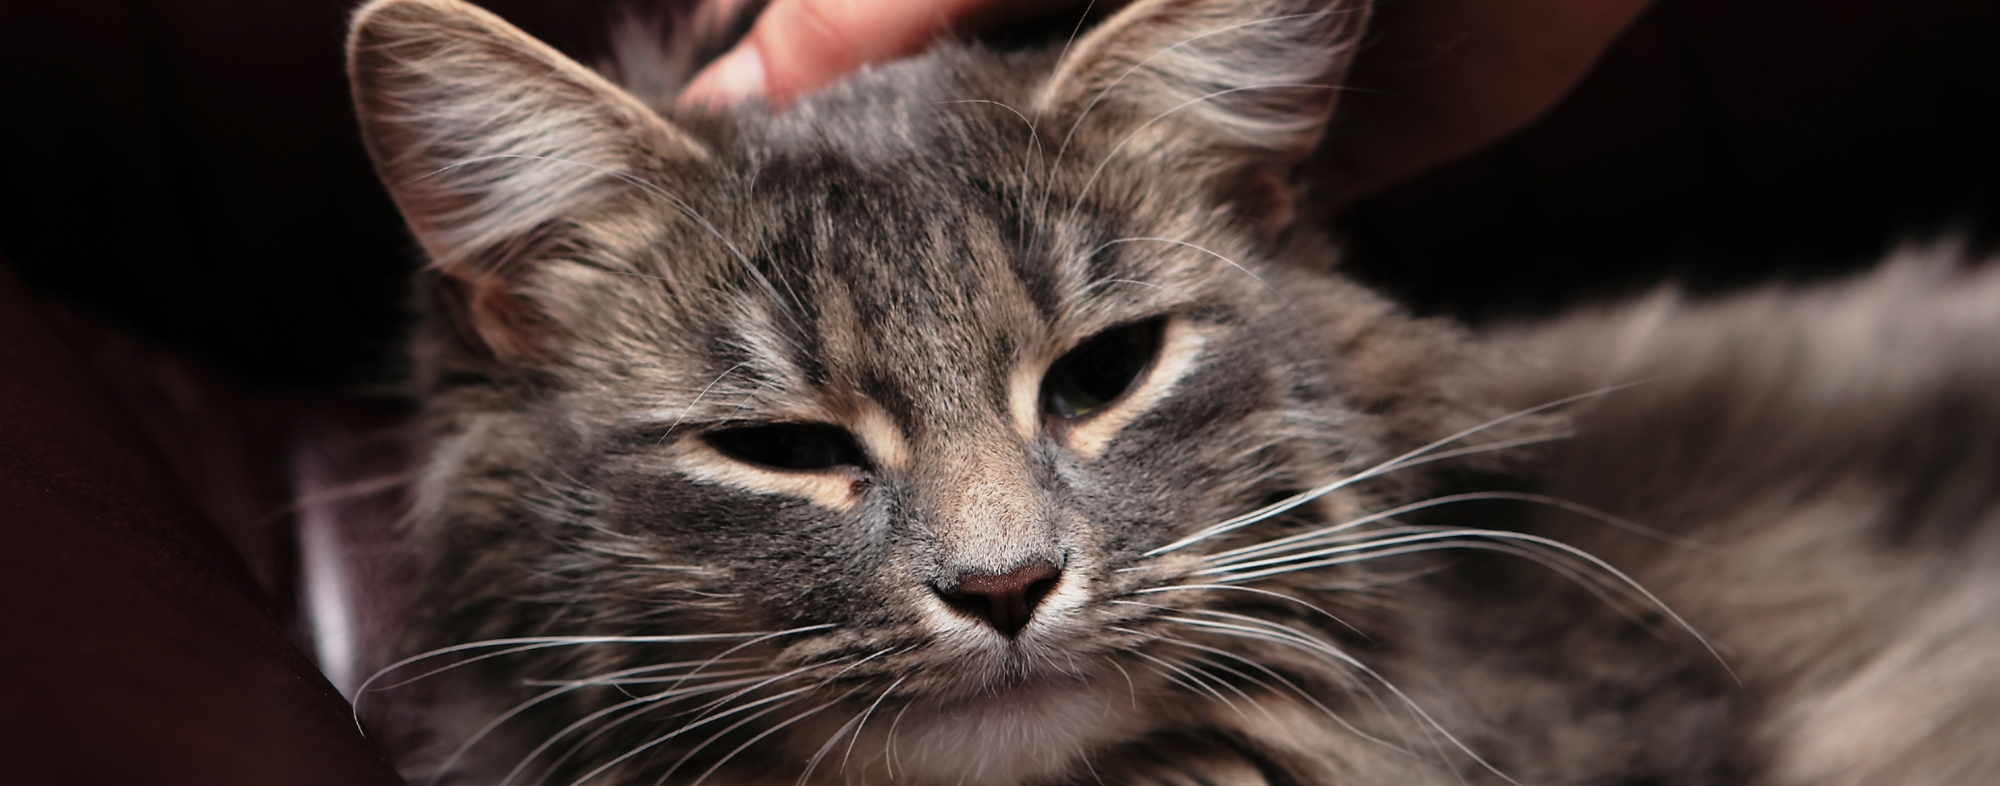 Adult cat with dark shades of gray and tan, being pet in appreciation